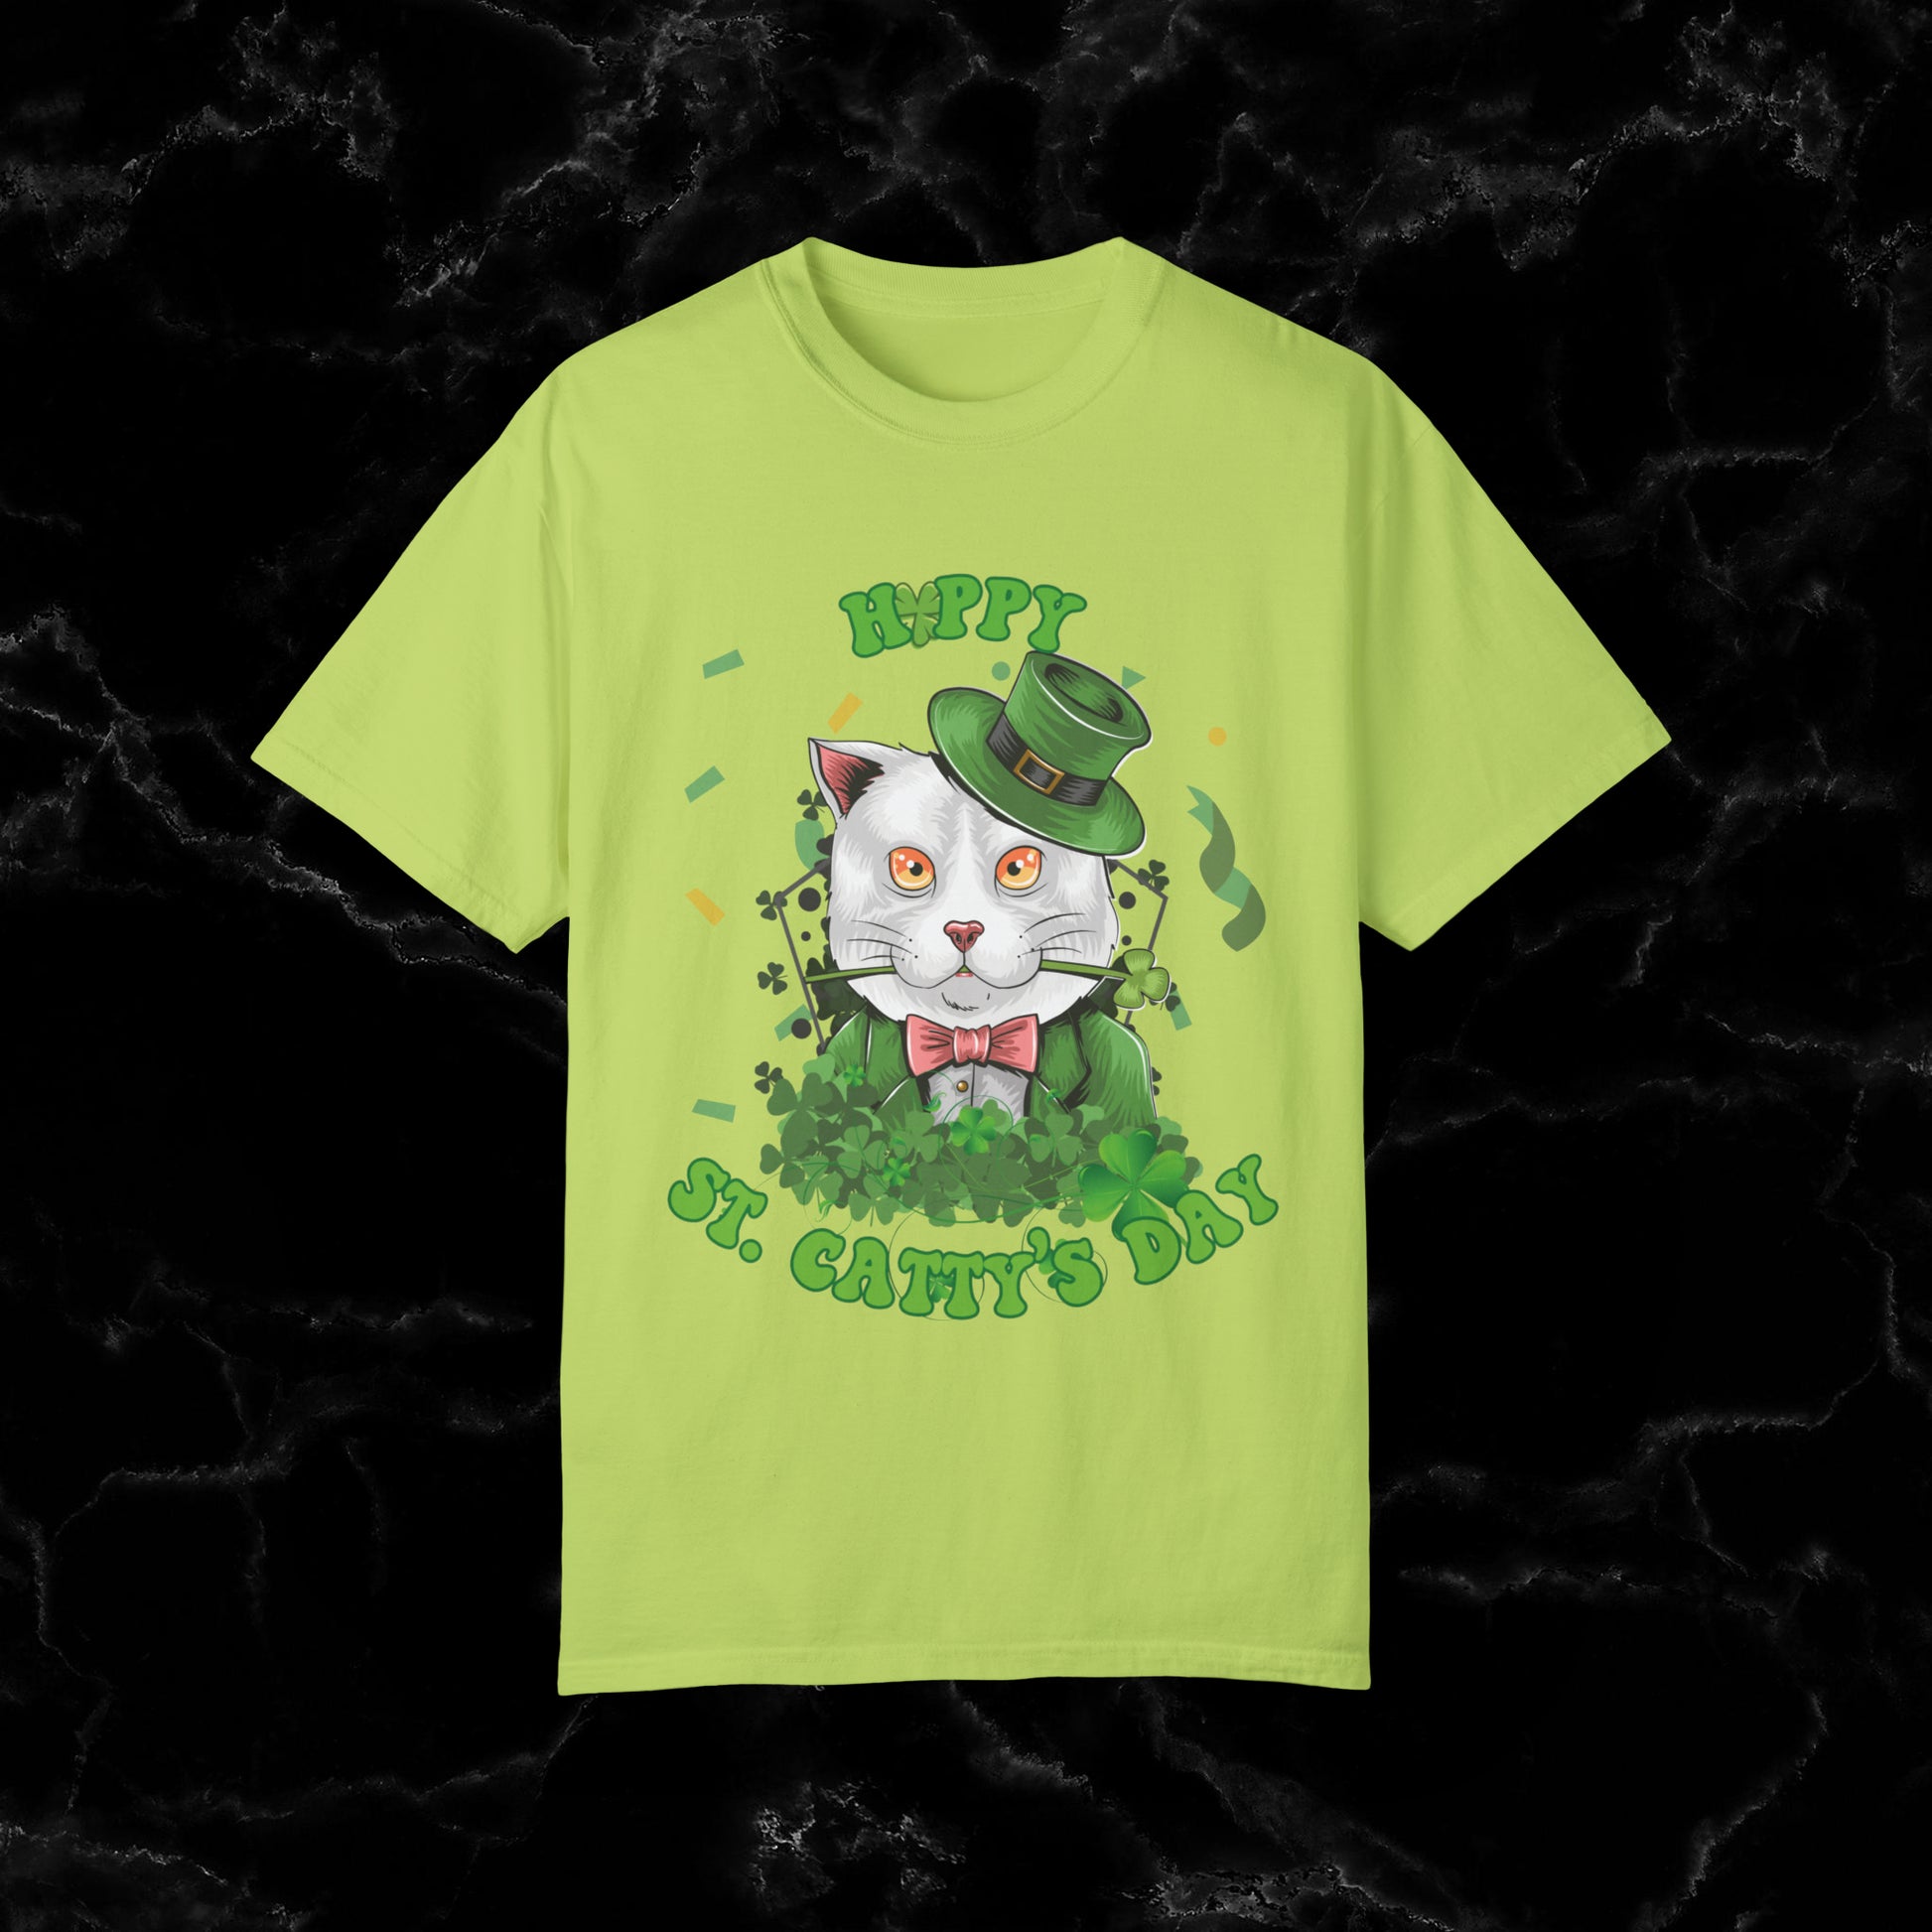 Happy St. Catty's Day Funny St. Patrick's Day Comfort Colors T-Shirt - St. Paddy's Day Shirt for Cat Lover St. Patty's Day Fun T-Shirt Kiwi S 